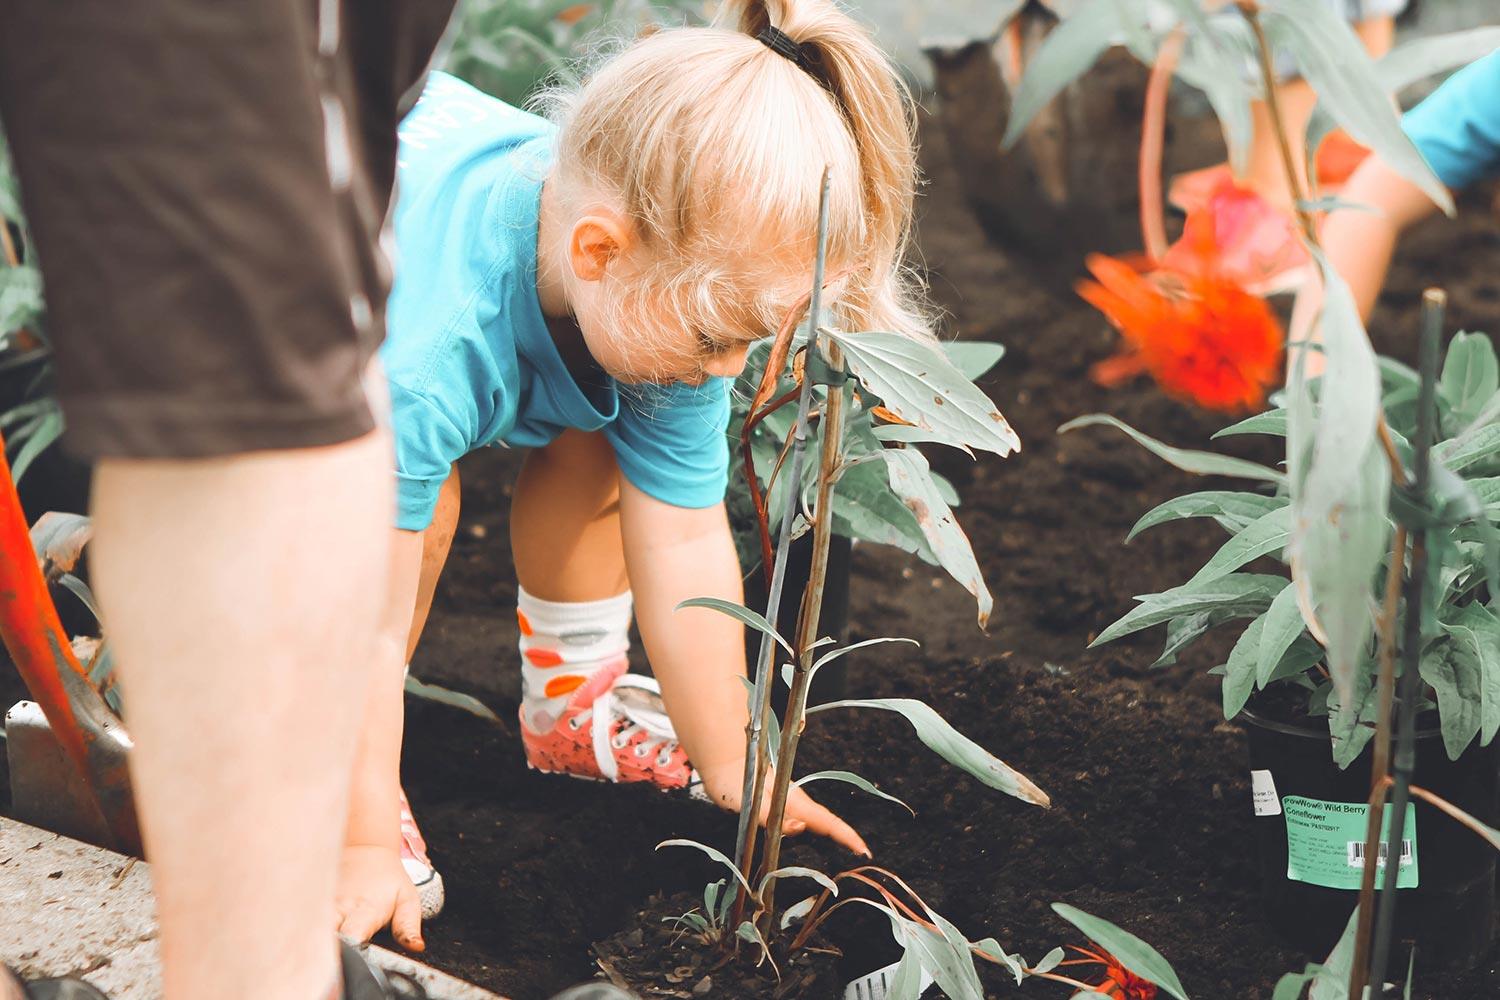 girl in blue t-shirt and white shorts standing in a garden planting a small plant